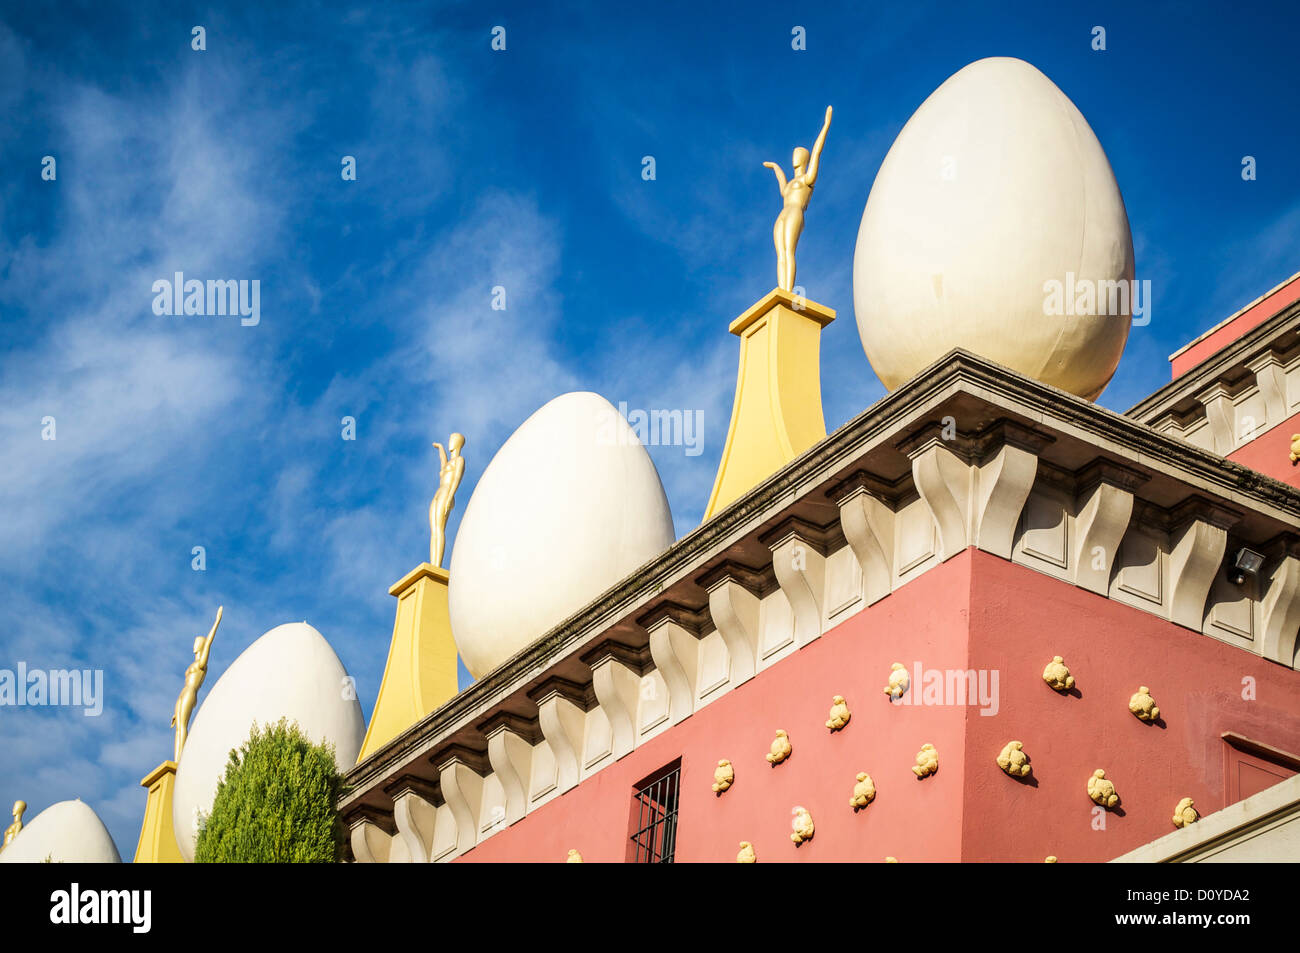 Huge decorative egg shapes alternate with golden statues on pedestals atop the Salvador Dali Museum in Figueres, Spain. Stock Photo